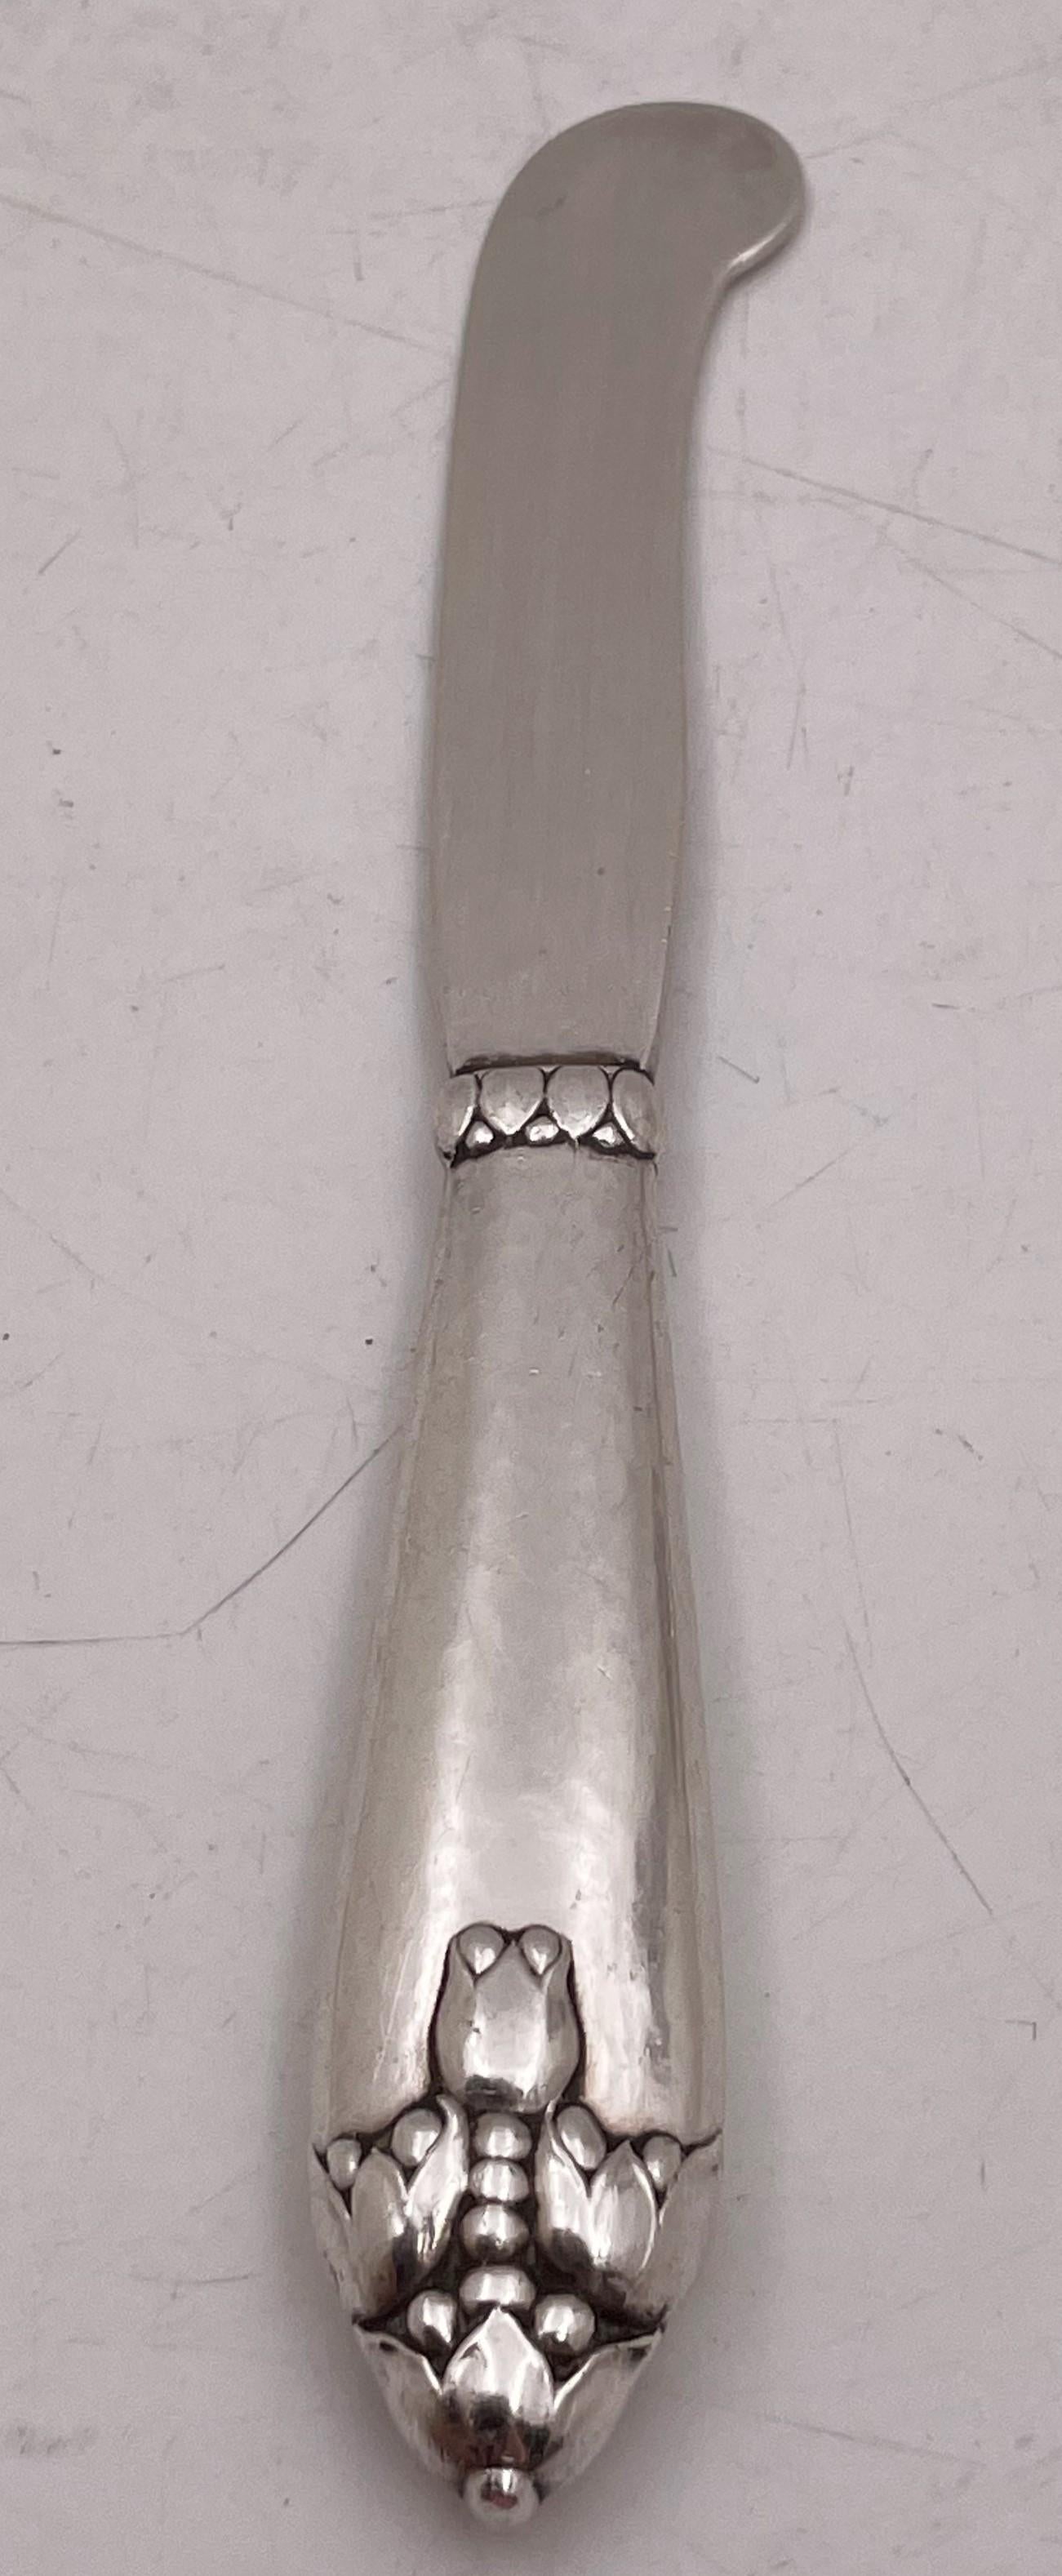 Rare Georg Jensen sterling silver butter spreader, dated 1925 from English hallmarks, with applied natural motifs, measuring 7'' in length by 7/8'' in width, and bearing hallmarks as shown. 

Danish silversmith Georg Jensen (1866-1935) set up his